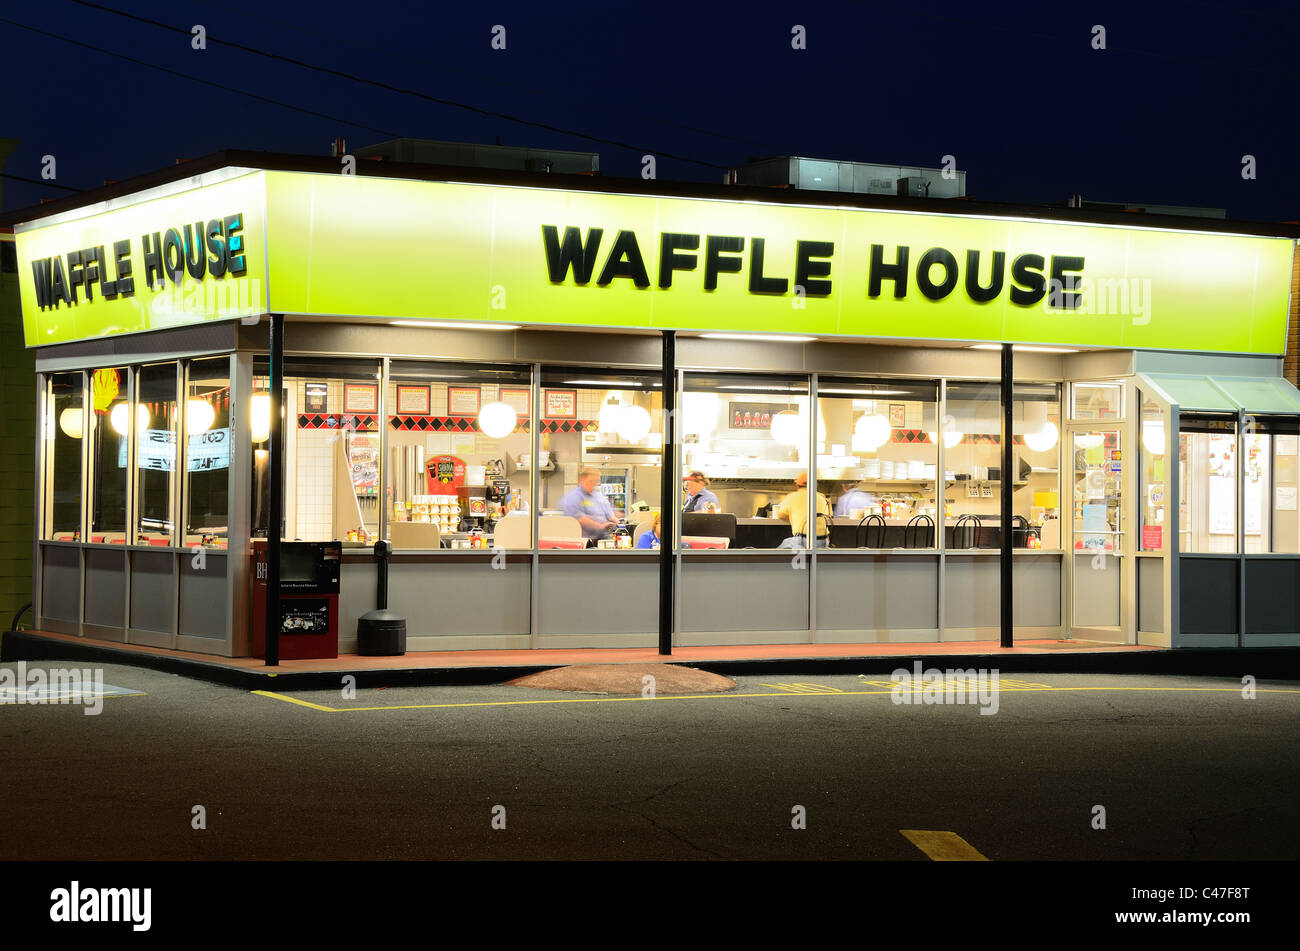 Athens, Georgia - June 1, 2011: Waffle House is a regional icon in the southern United States. Stock Photo